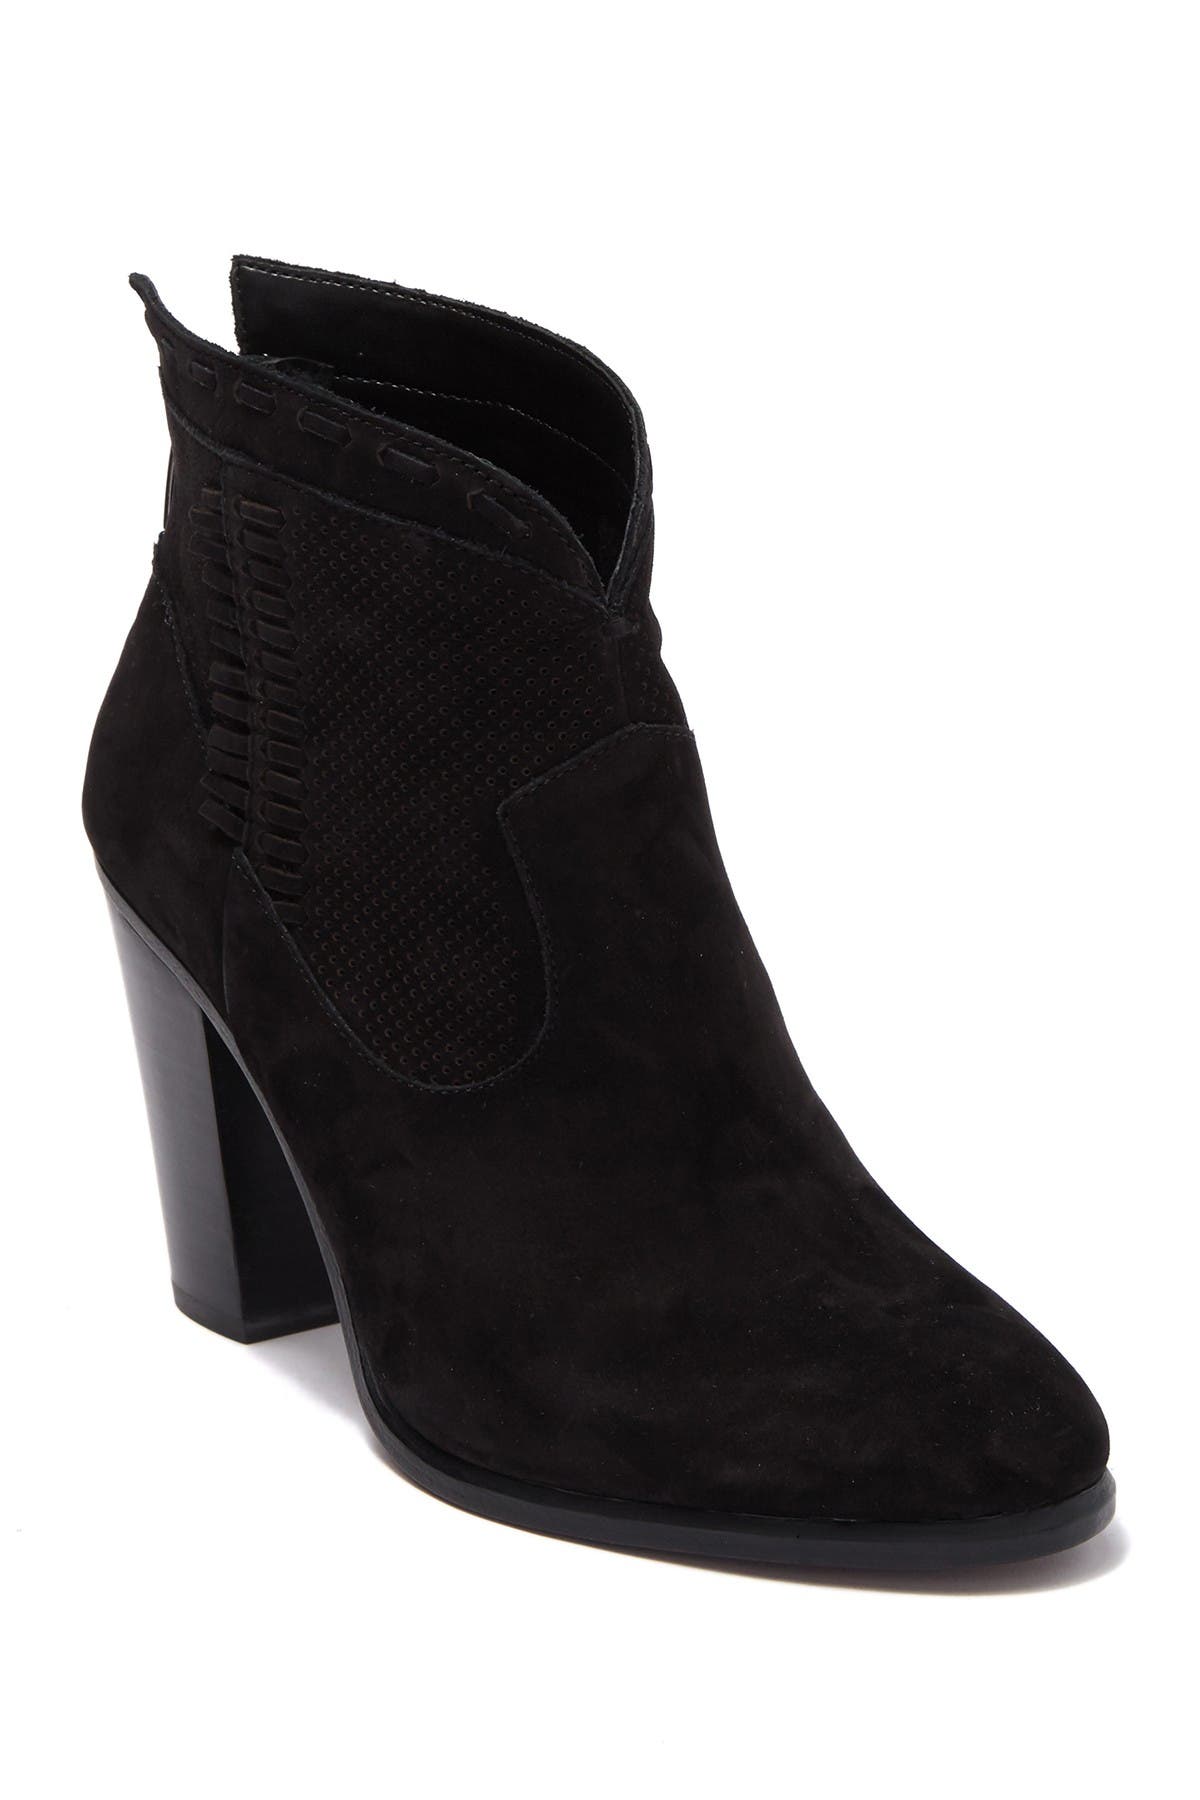 vince camuto booties sale